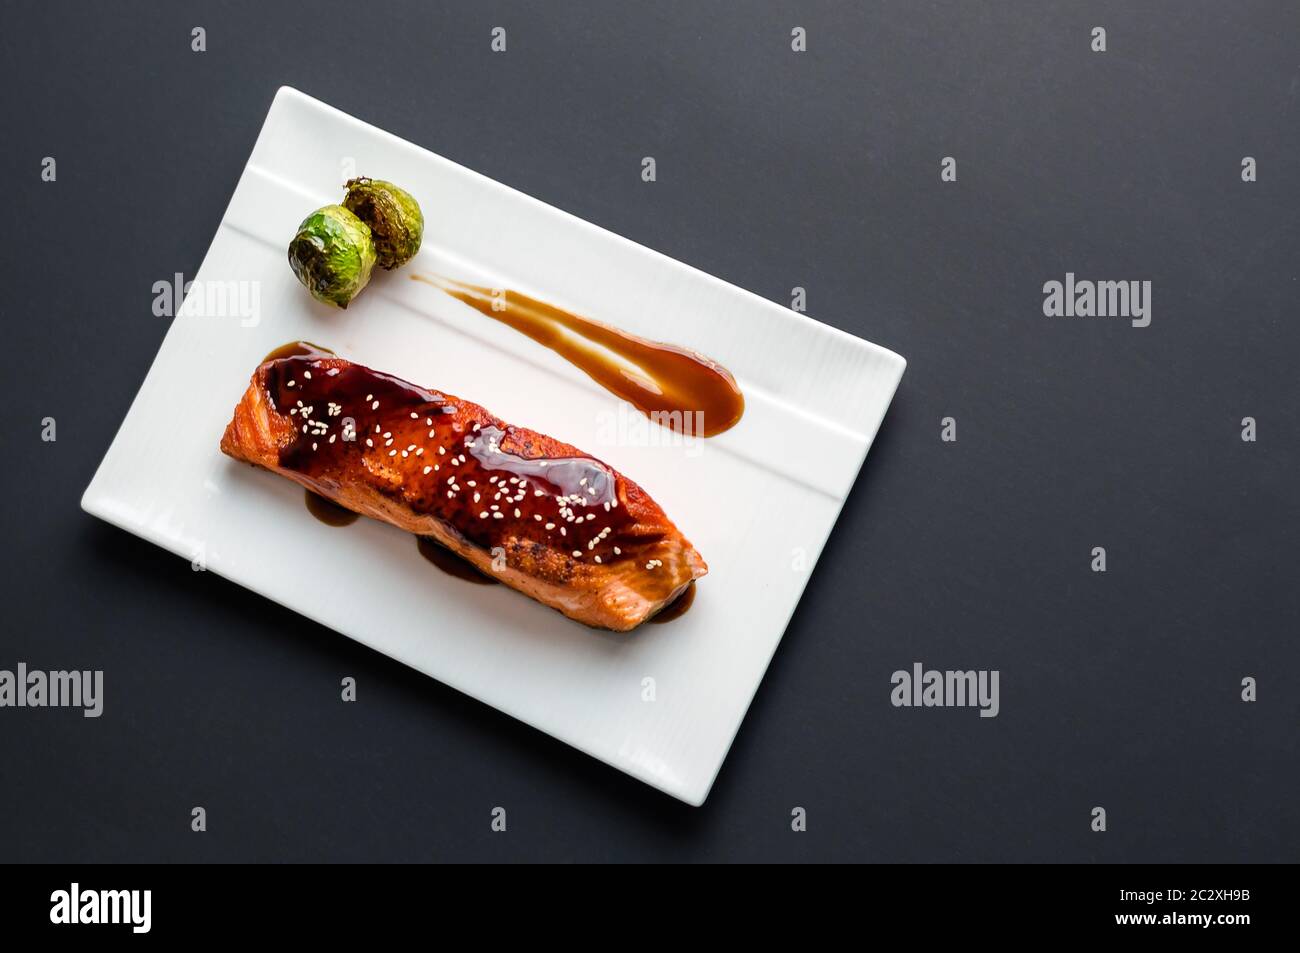 Japanese cuisine inspired food made of grilled salmon fillet glazed in delicious teriyaki sauce (soy sauce base) & Brussels sprouts on white plate. Stock Photo